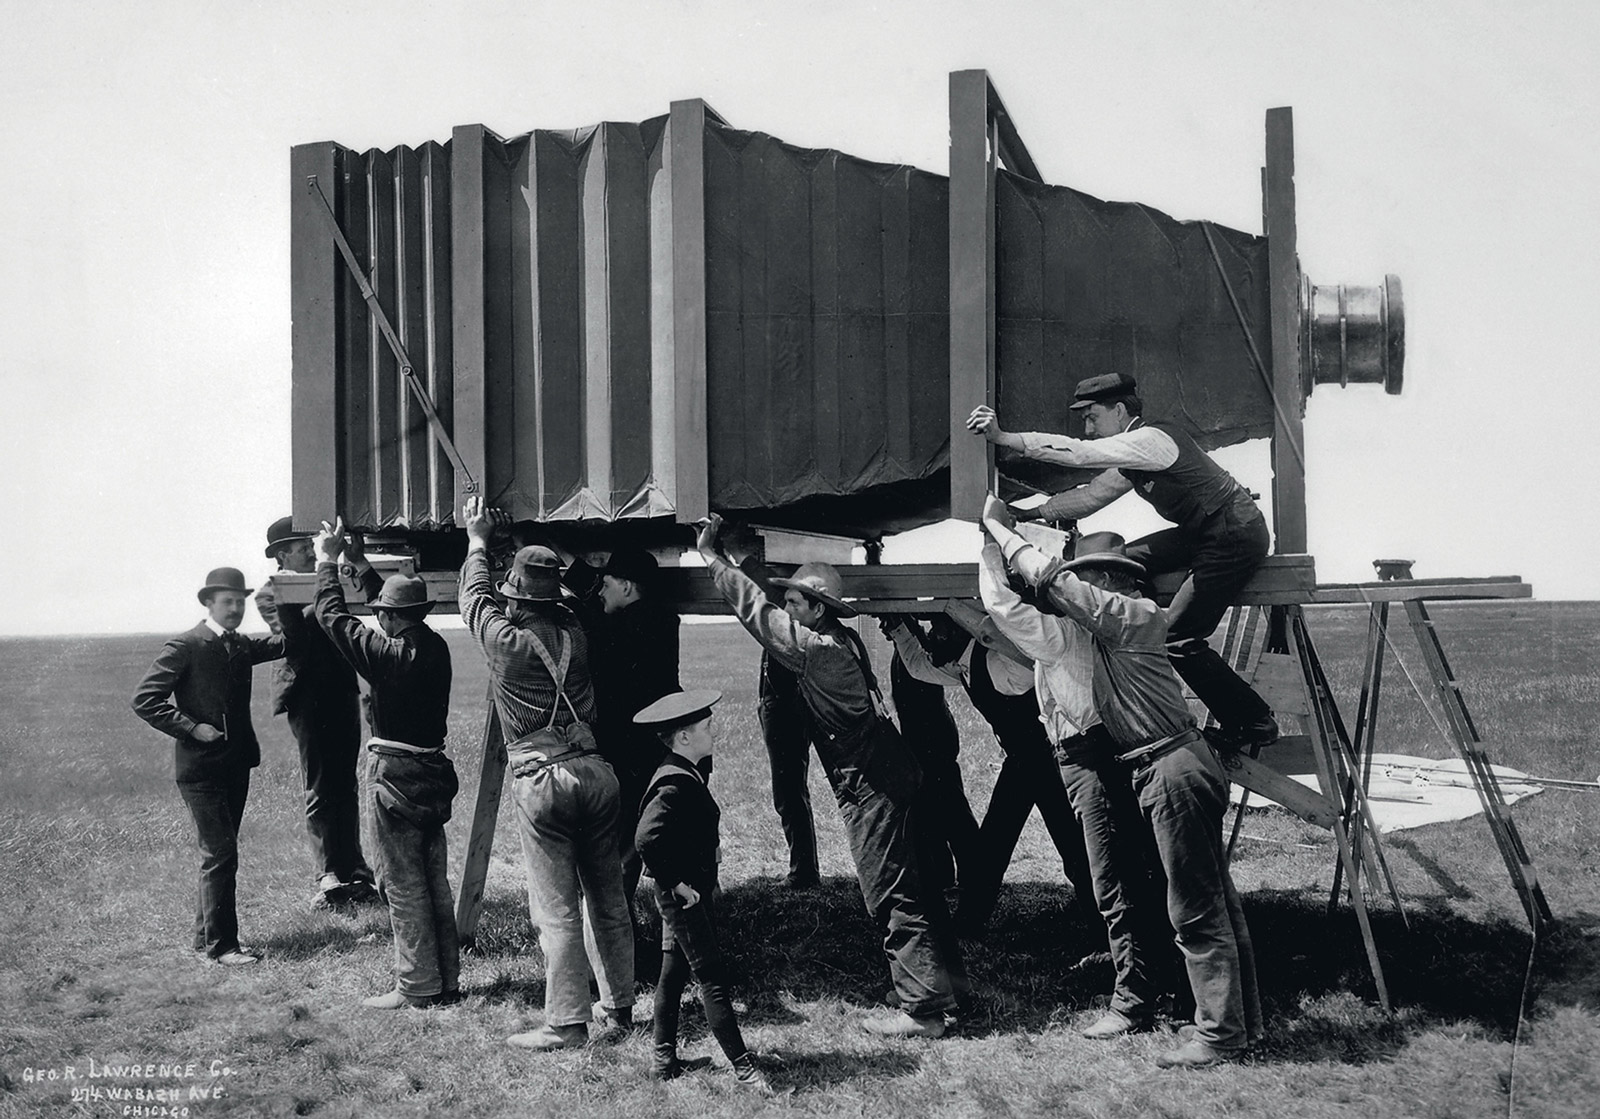 A 1900 photograph of George R. Lawrence and his crew installing his 1400-pound camera to photograph the Alton Limited.